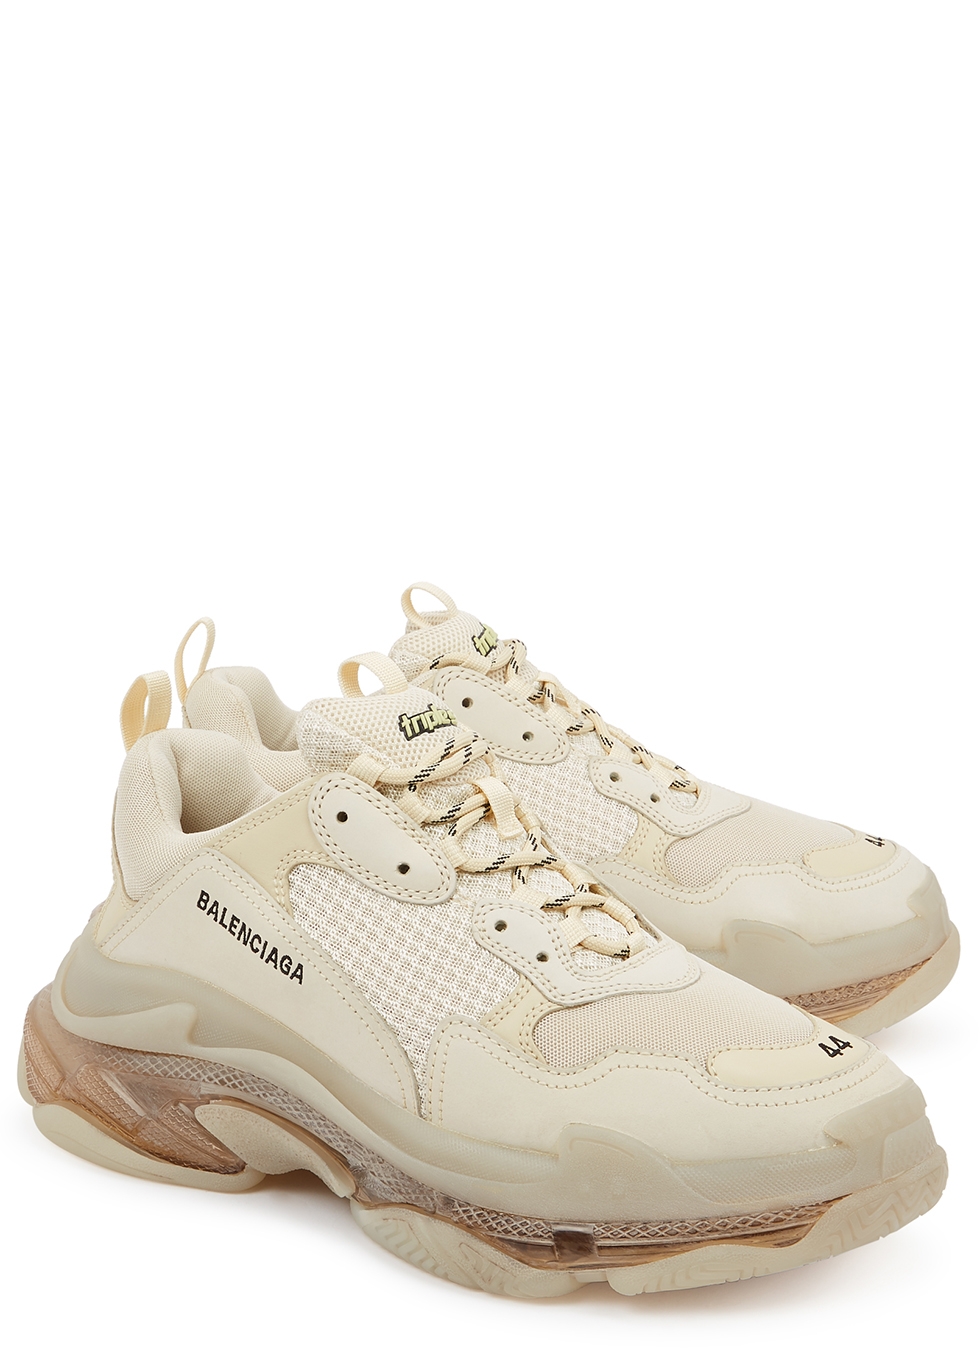 Balenciaga Triple S suede leather and mesh Net a Porter